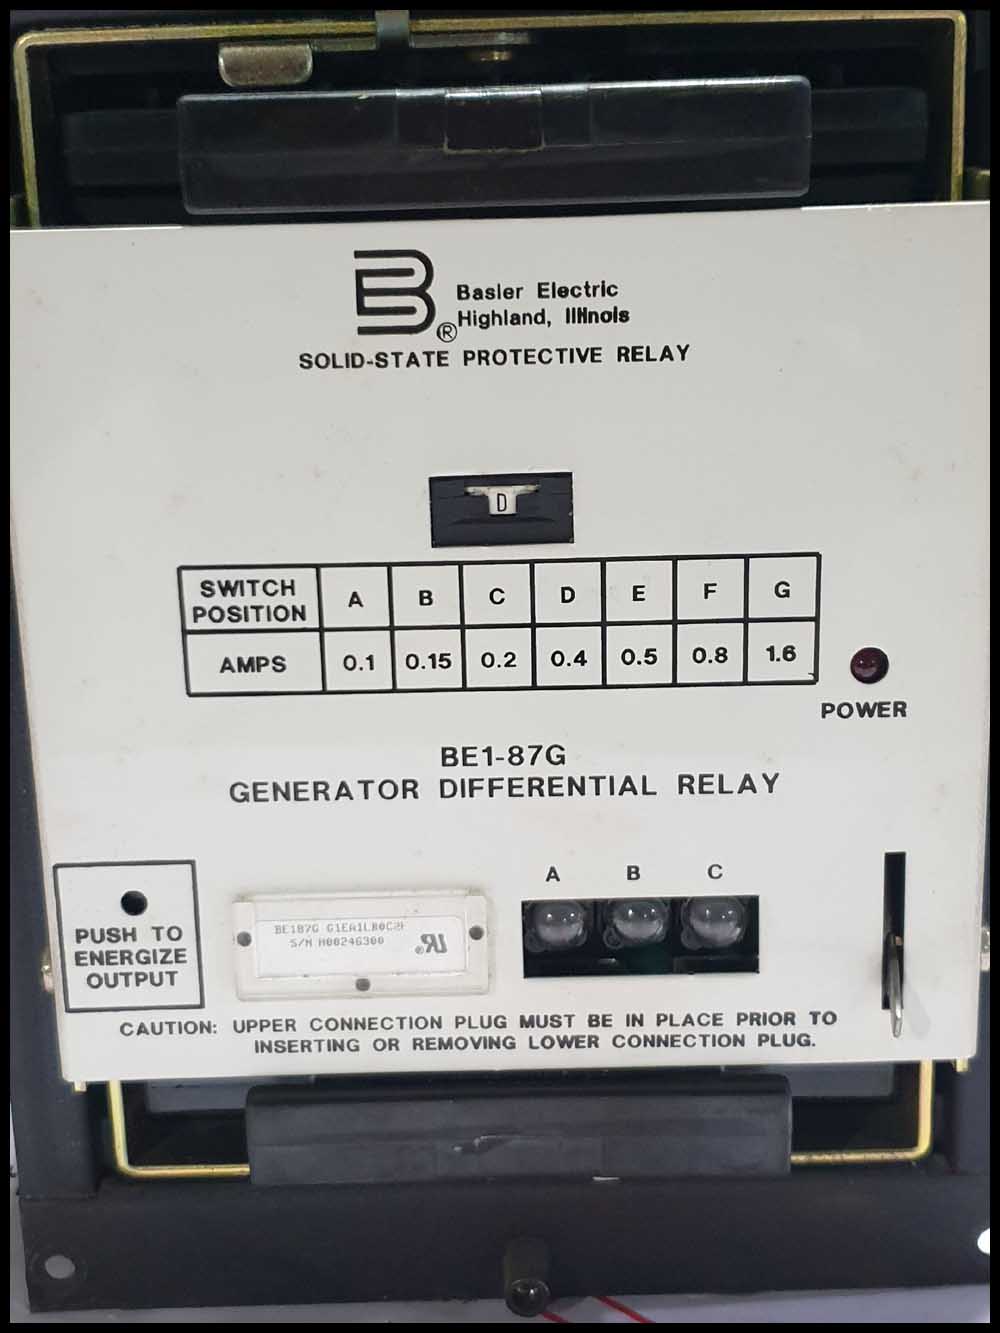 Basler Electric BE1-87G Generator Differential Relay